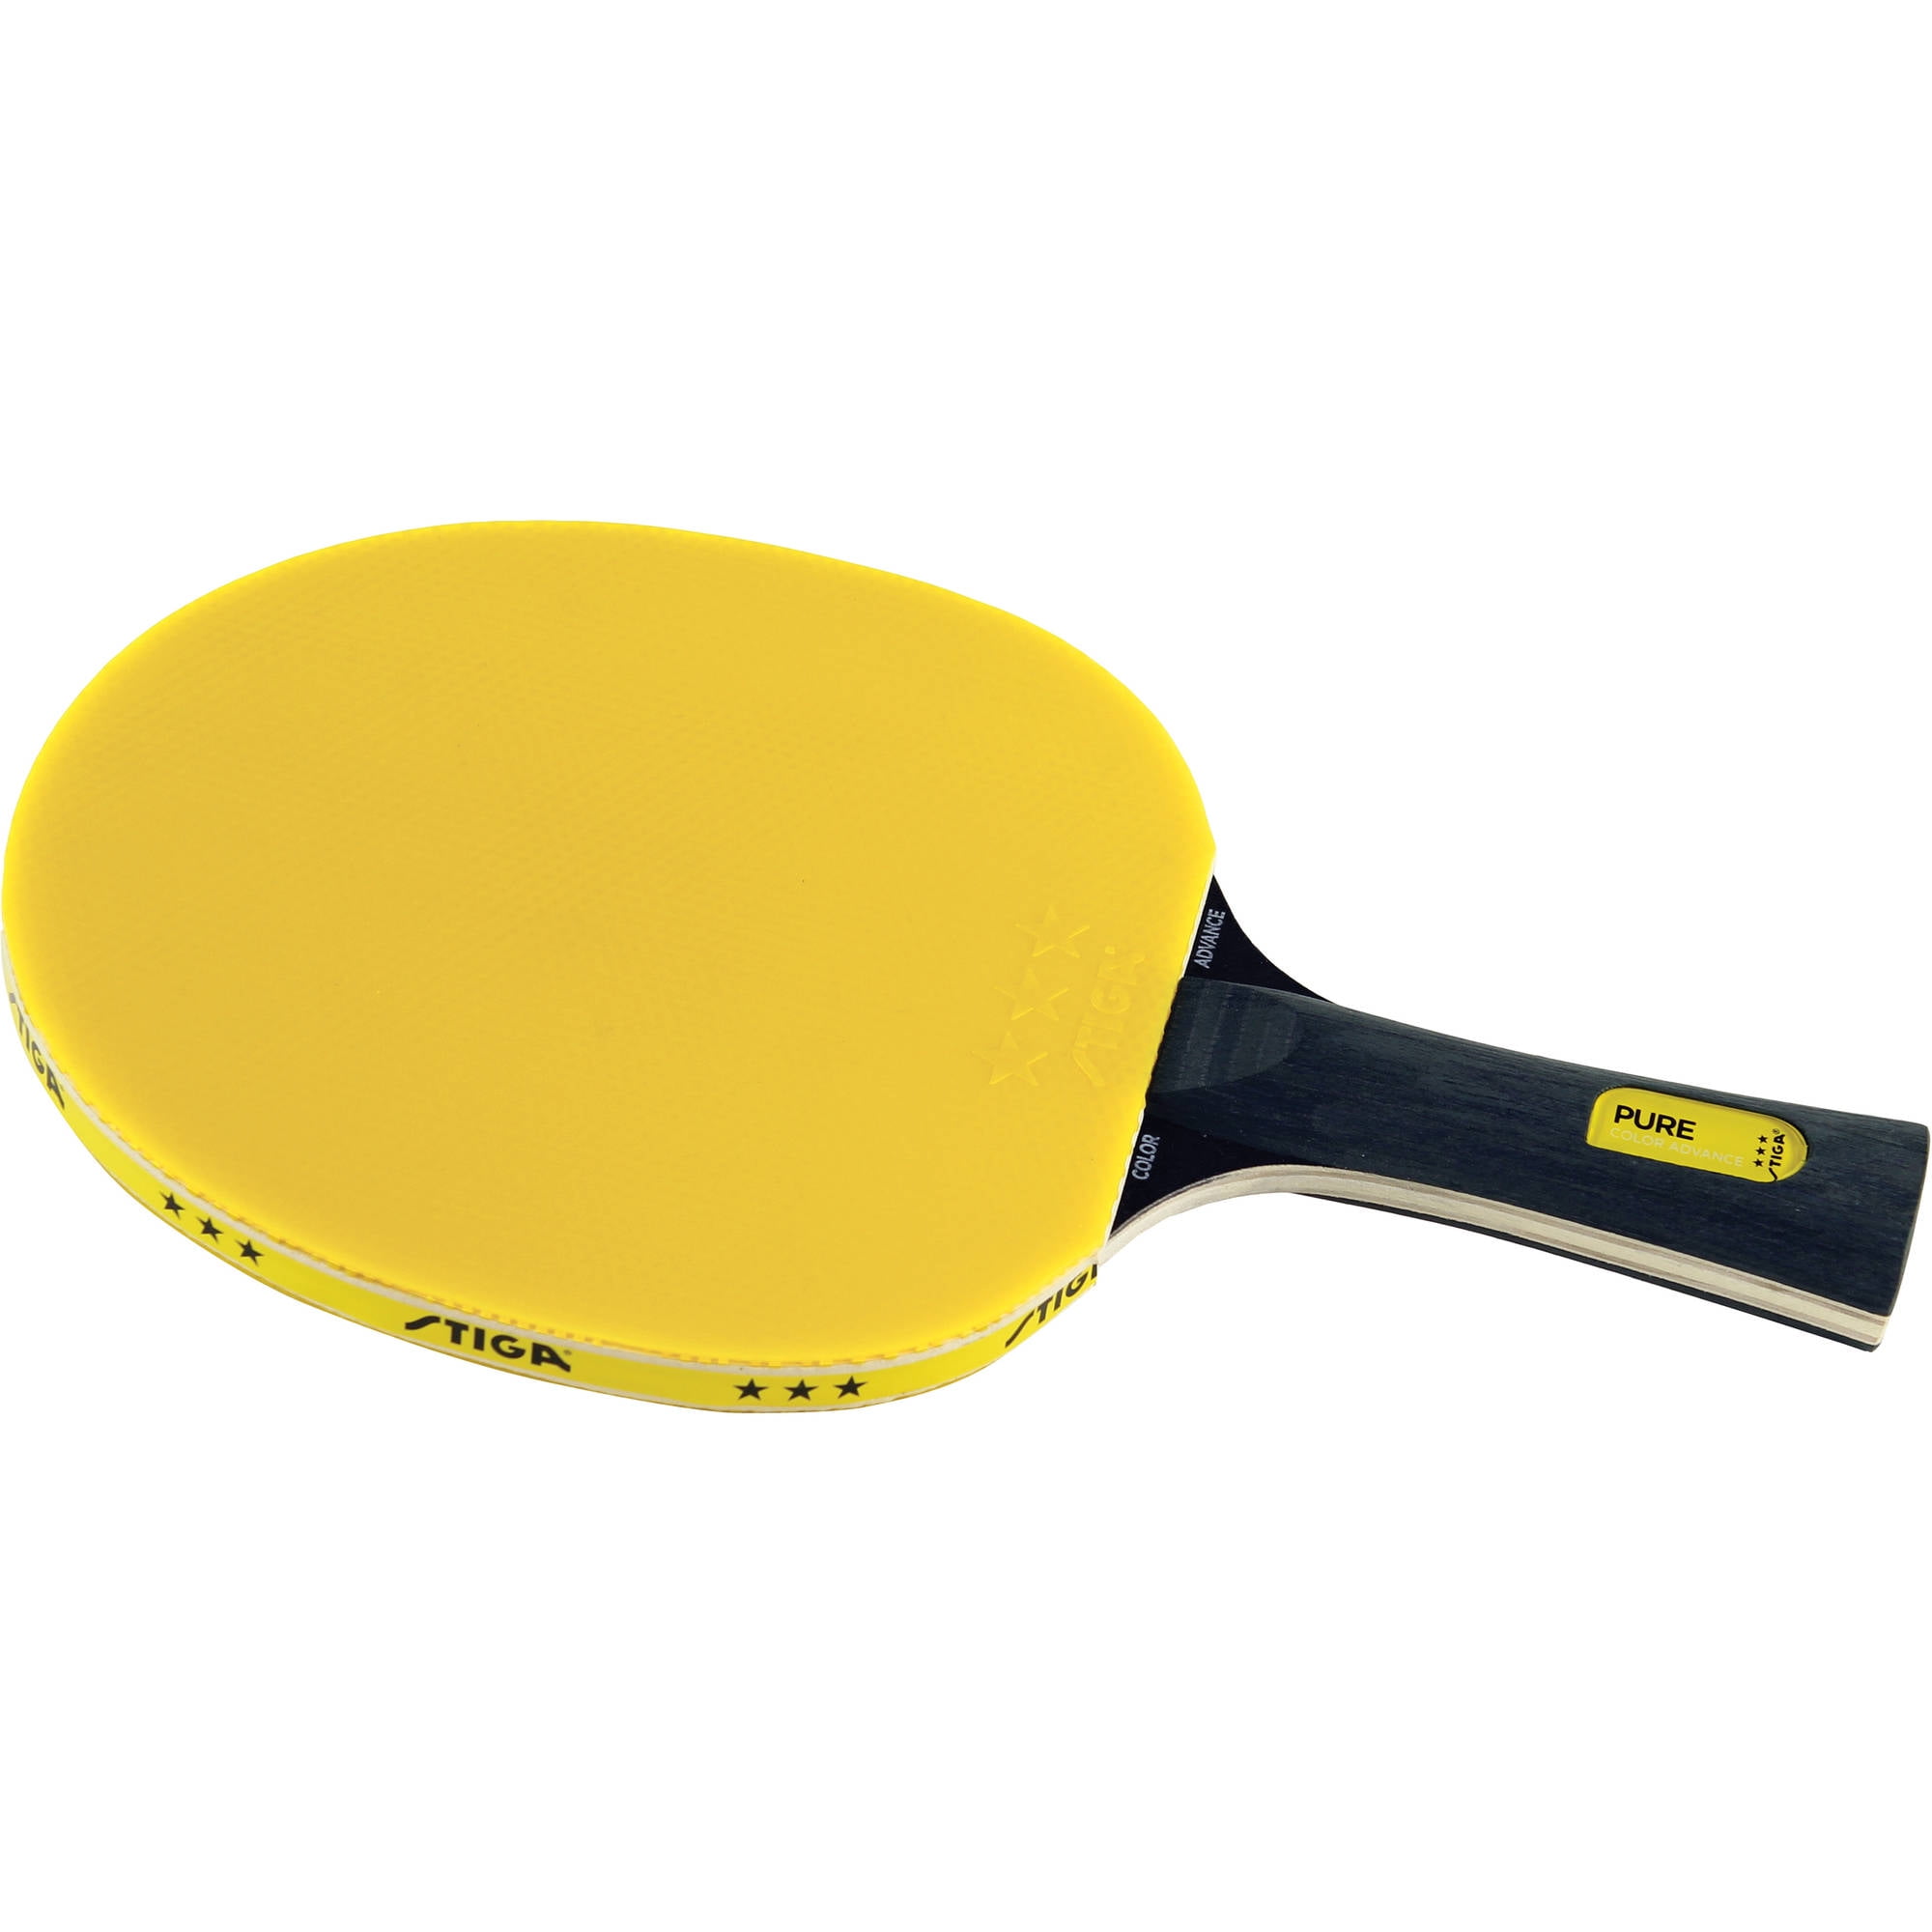 STIGA Aluminum Table Tennis Racket Hard Case Transports and Stores One Racket an 